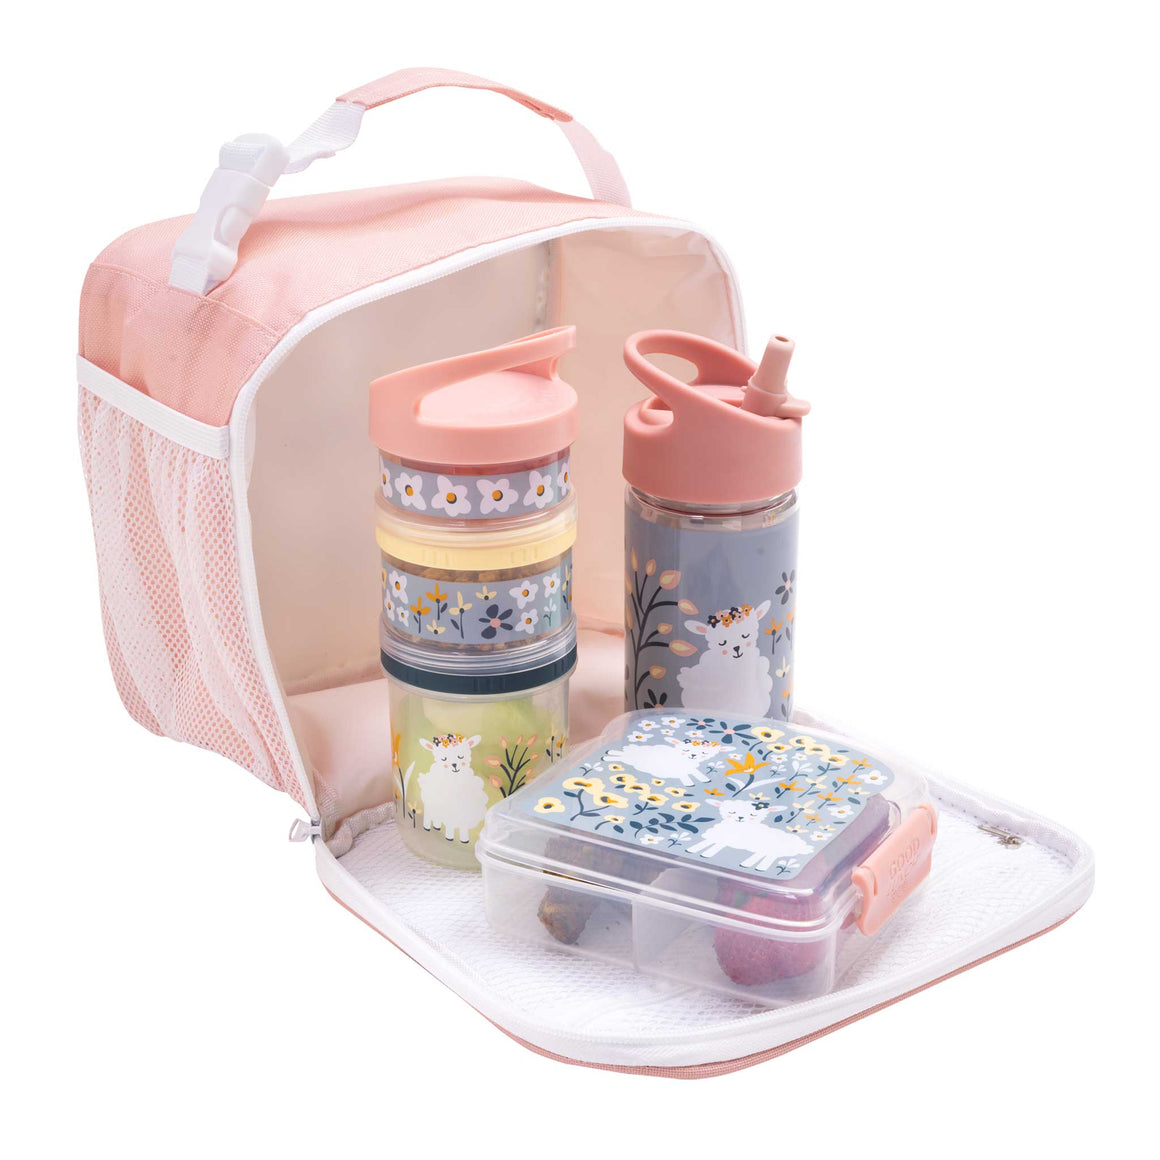 Lily The Lamb - Super Zippee Lunch Tote